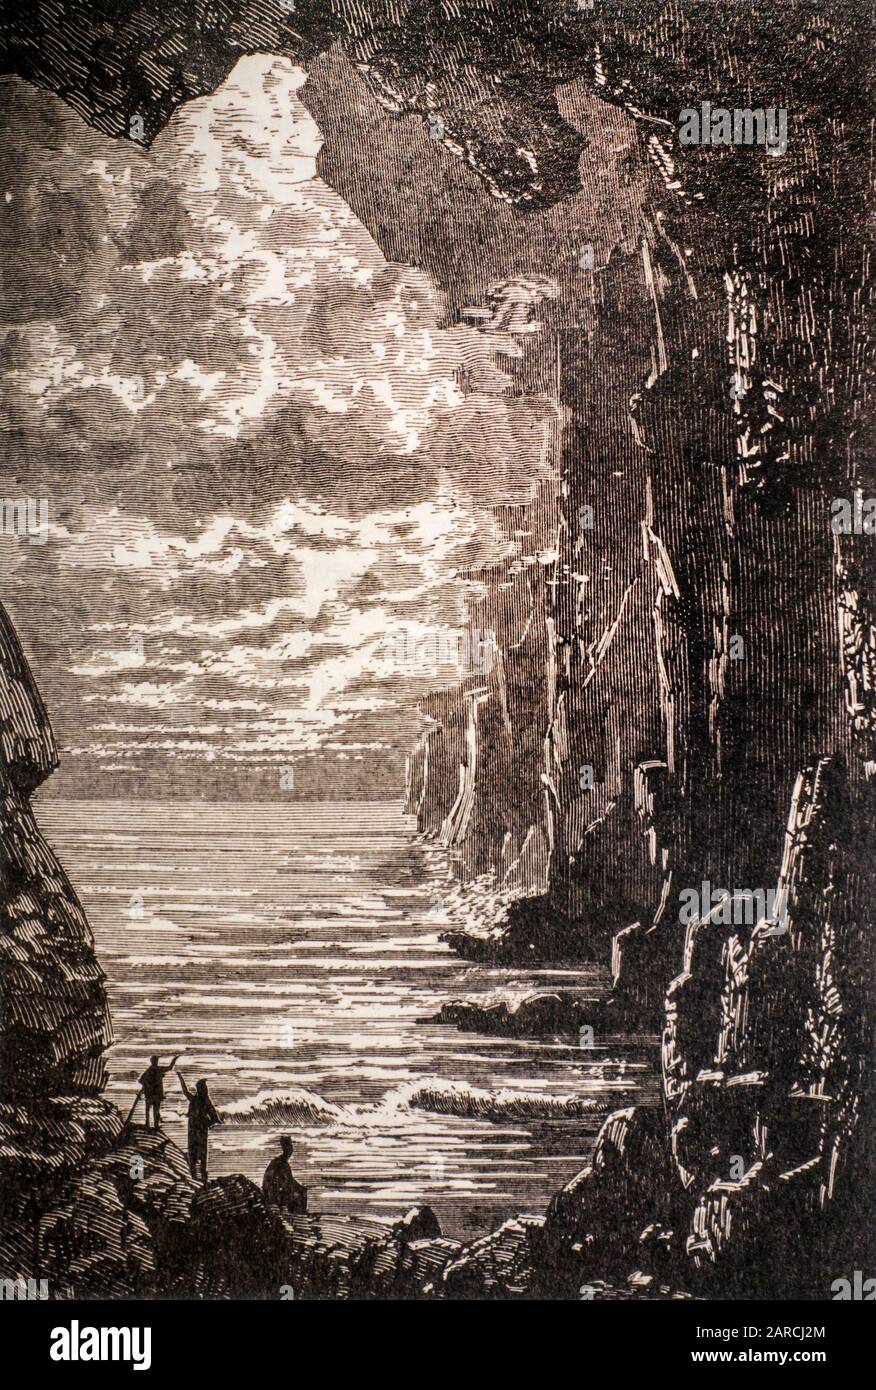 1864 book illustration The Central Sea from the science fiction novel Journey to the Center of the Earth by French writer / novelist Jules Verne Stock Photo